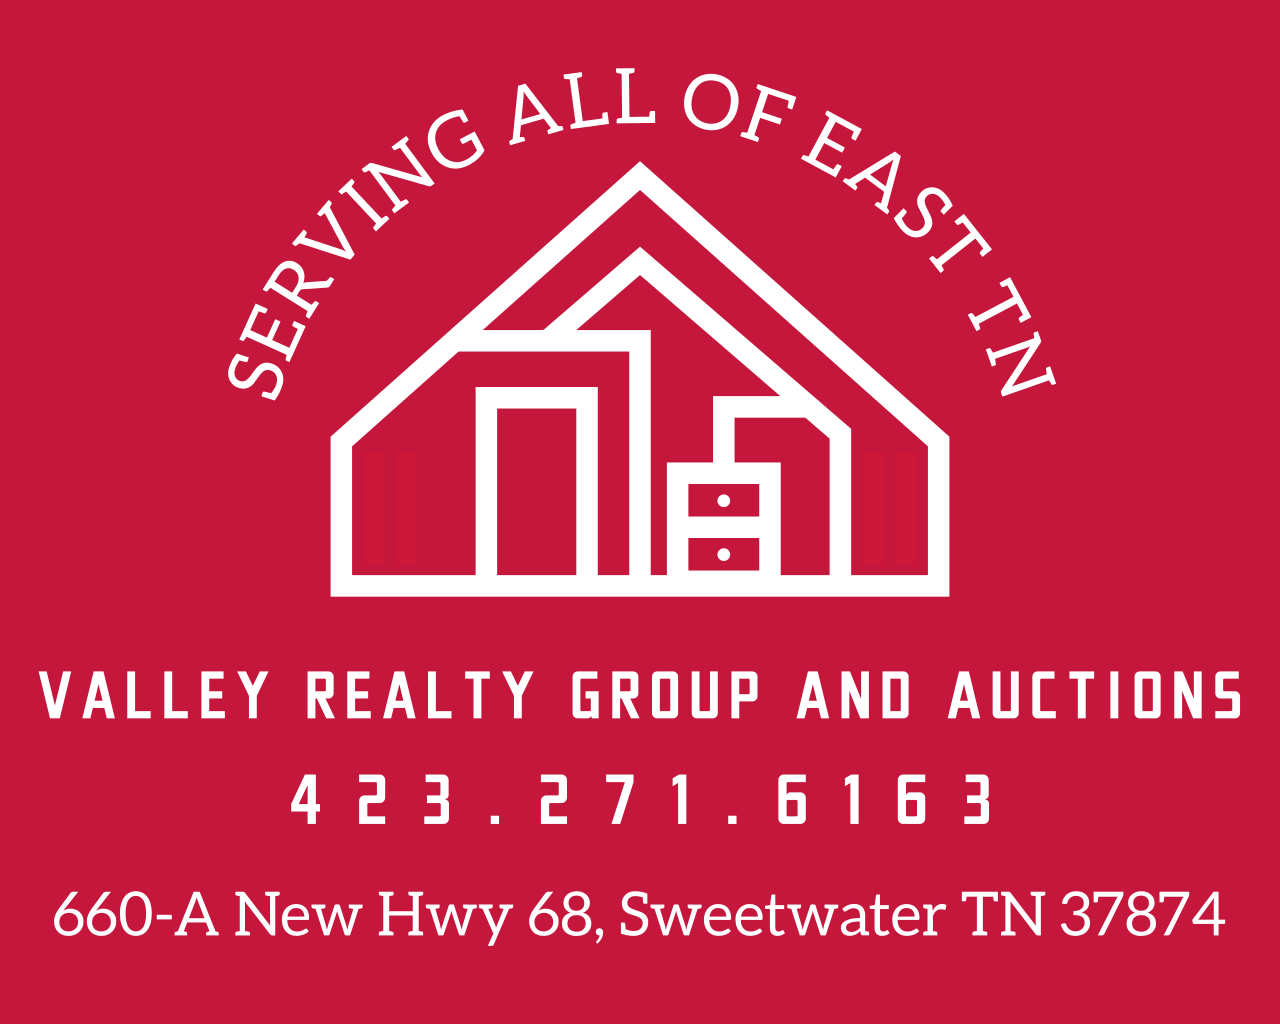 VALLEY REALTY GROUP AND AUCTIONS's web page